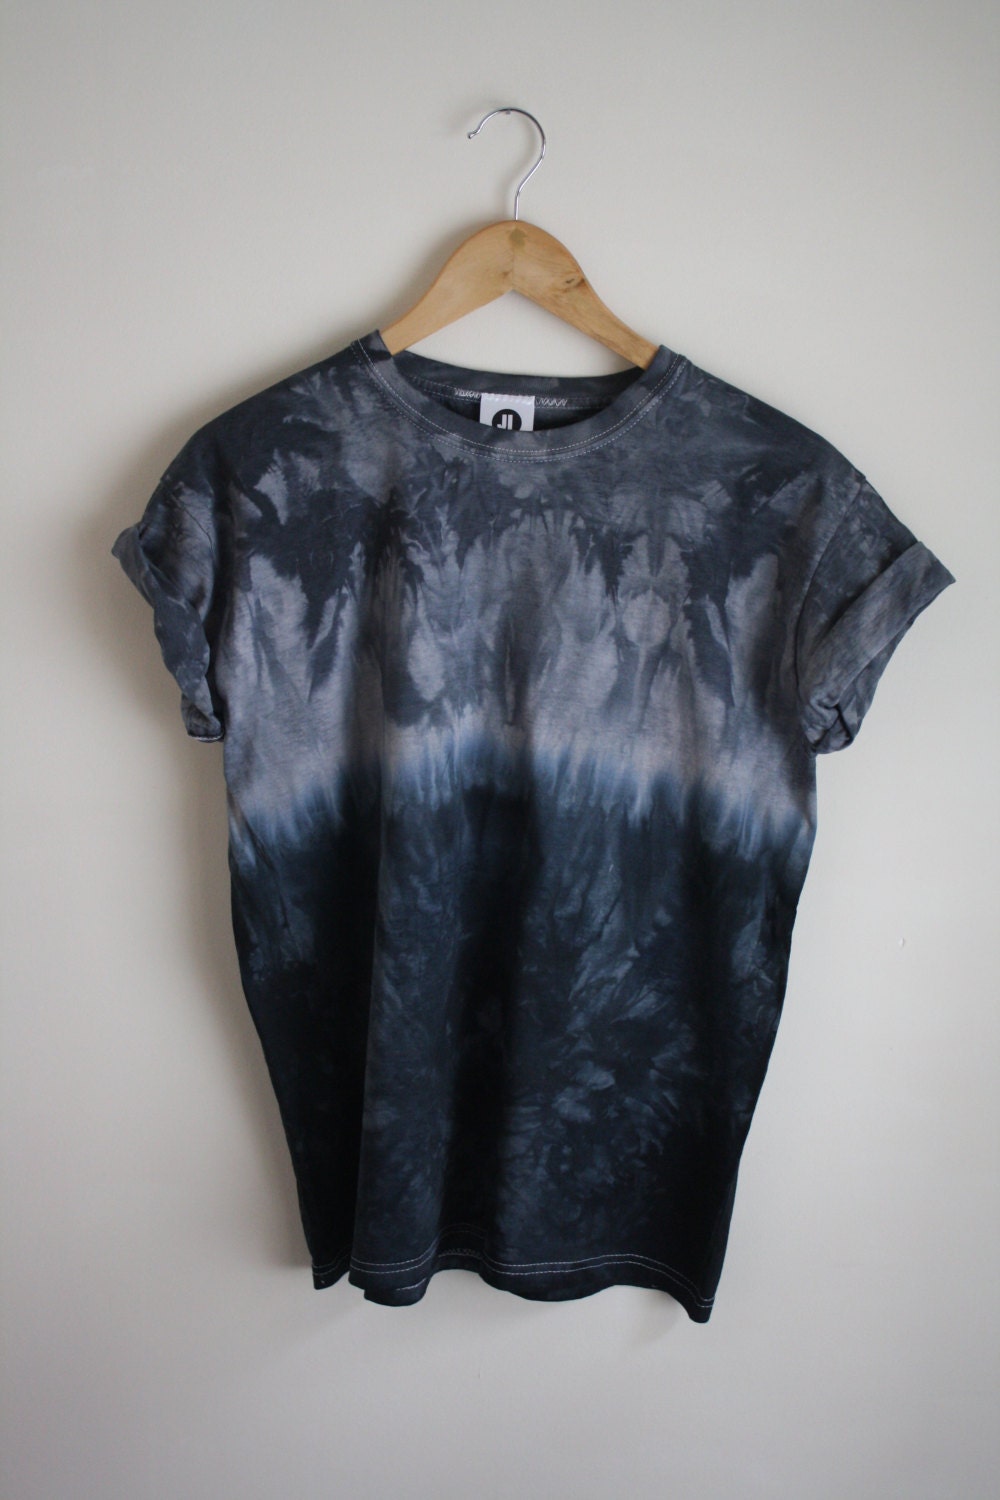 Dip Dye Tie Dye T-Shirt Unisex Grey and by JessIrwinClothing